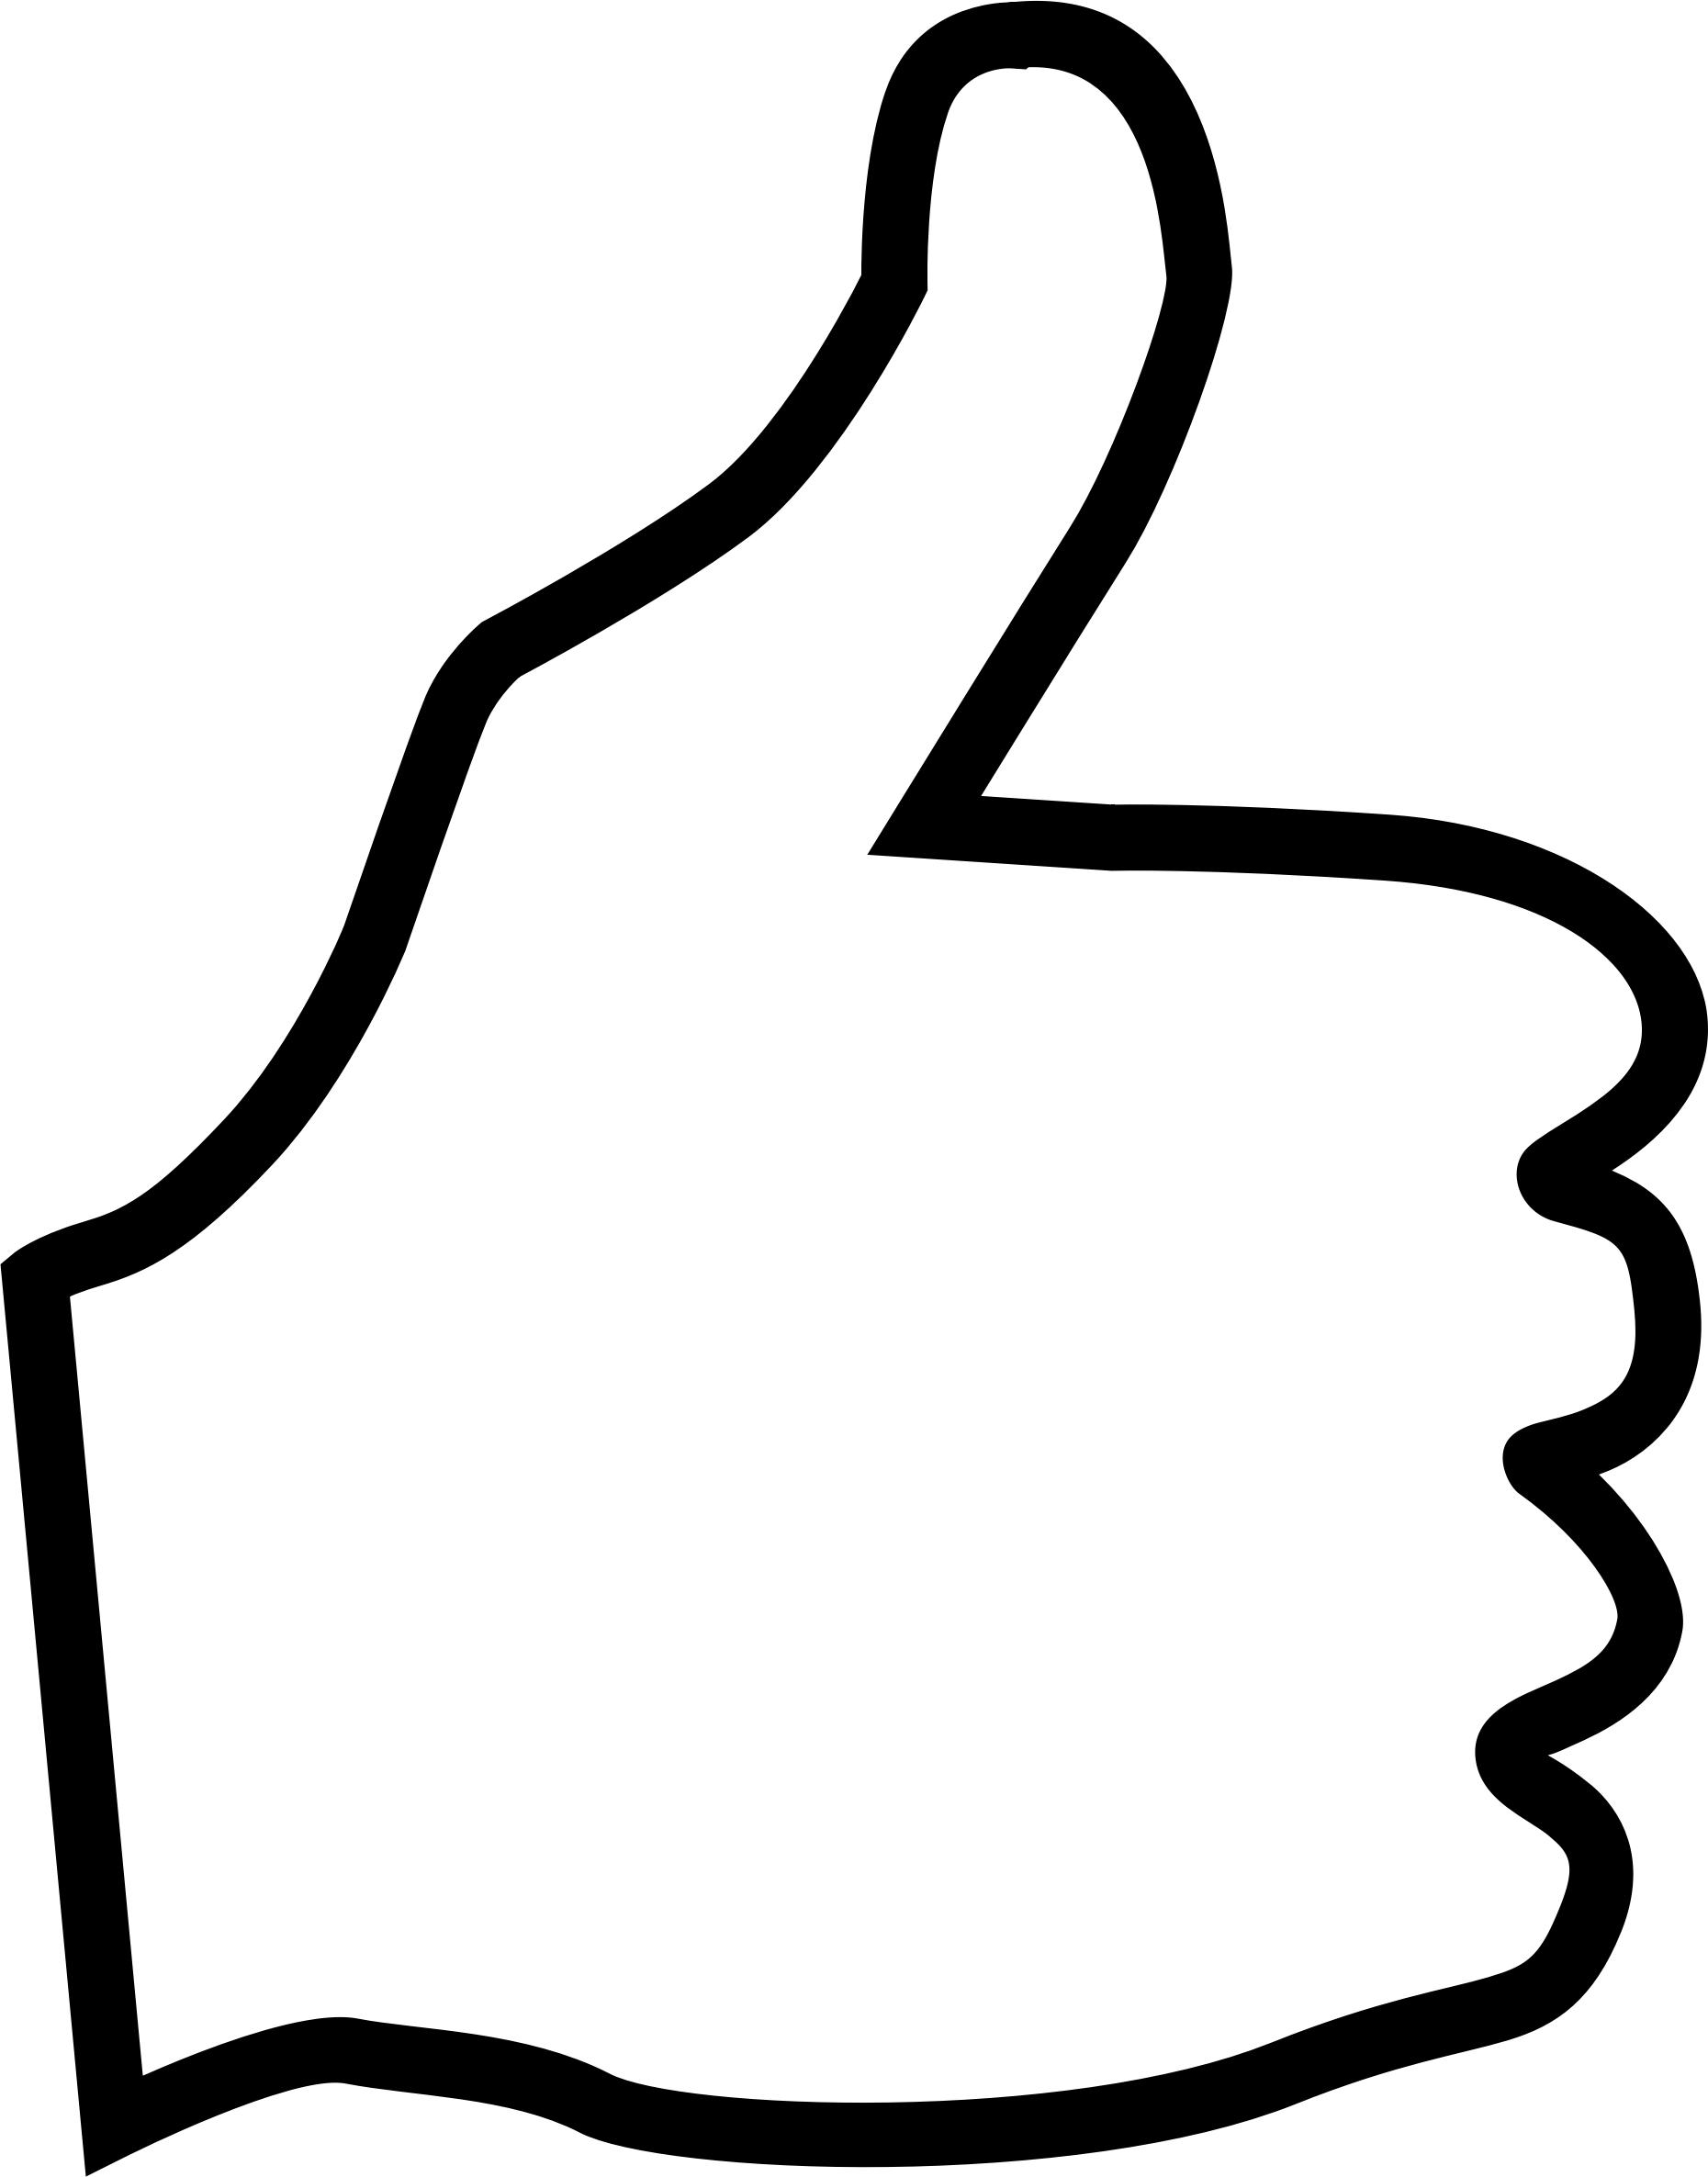 Thumbs Up Sign Clipart